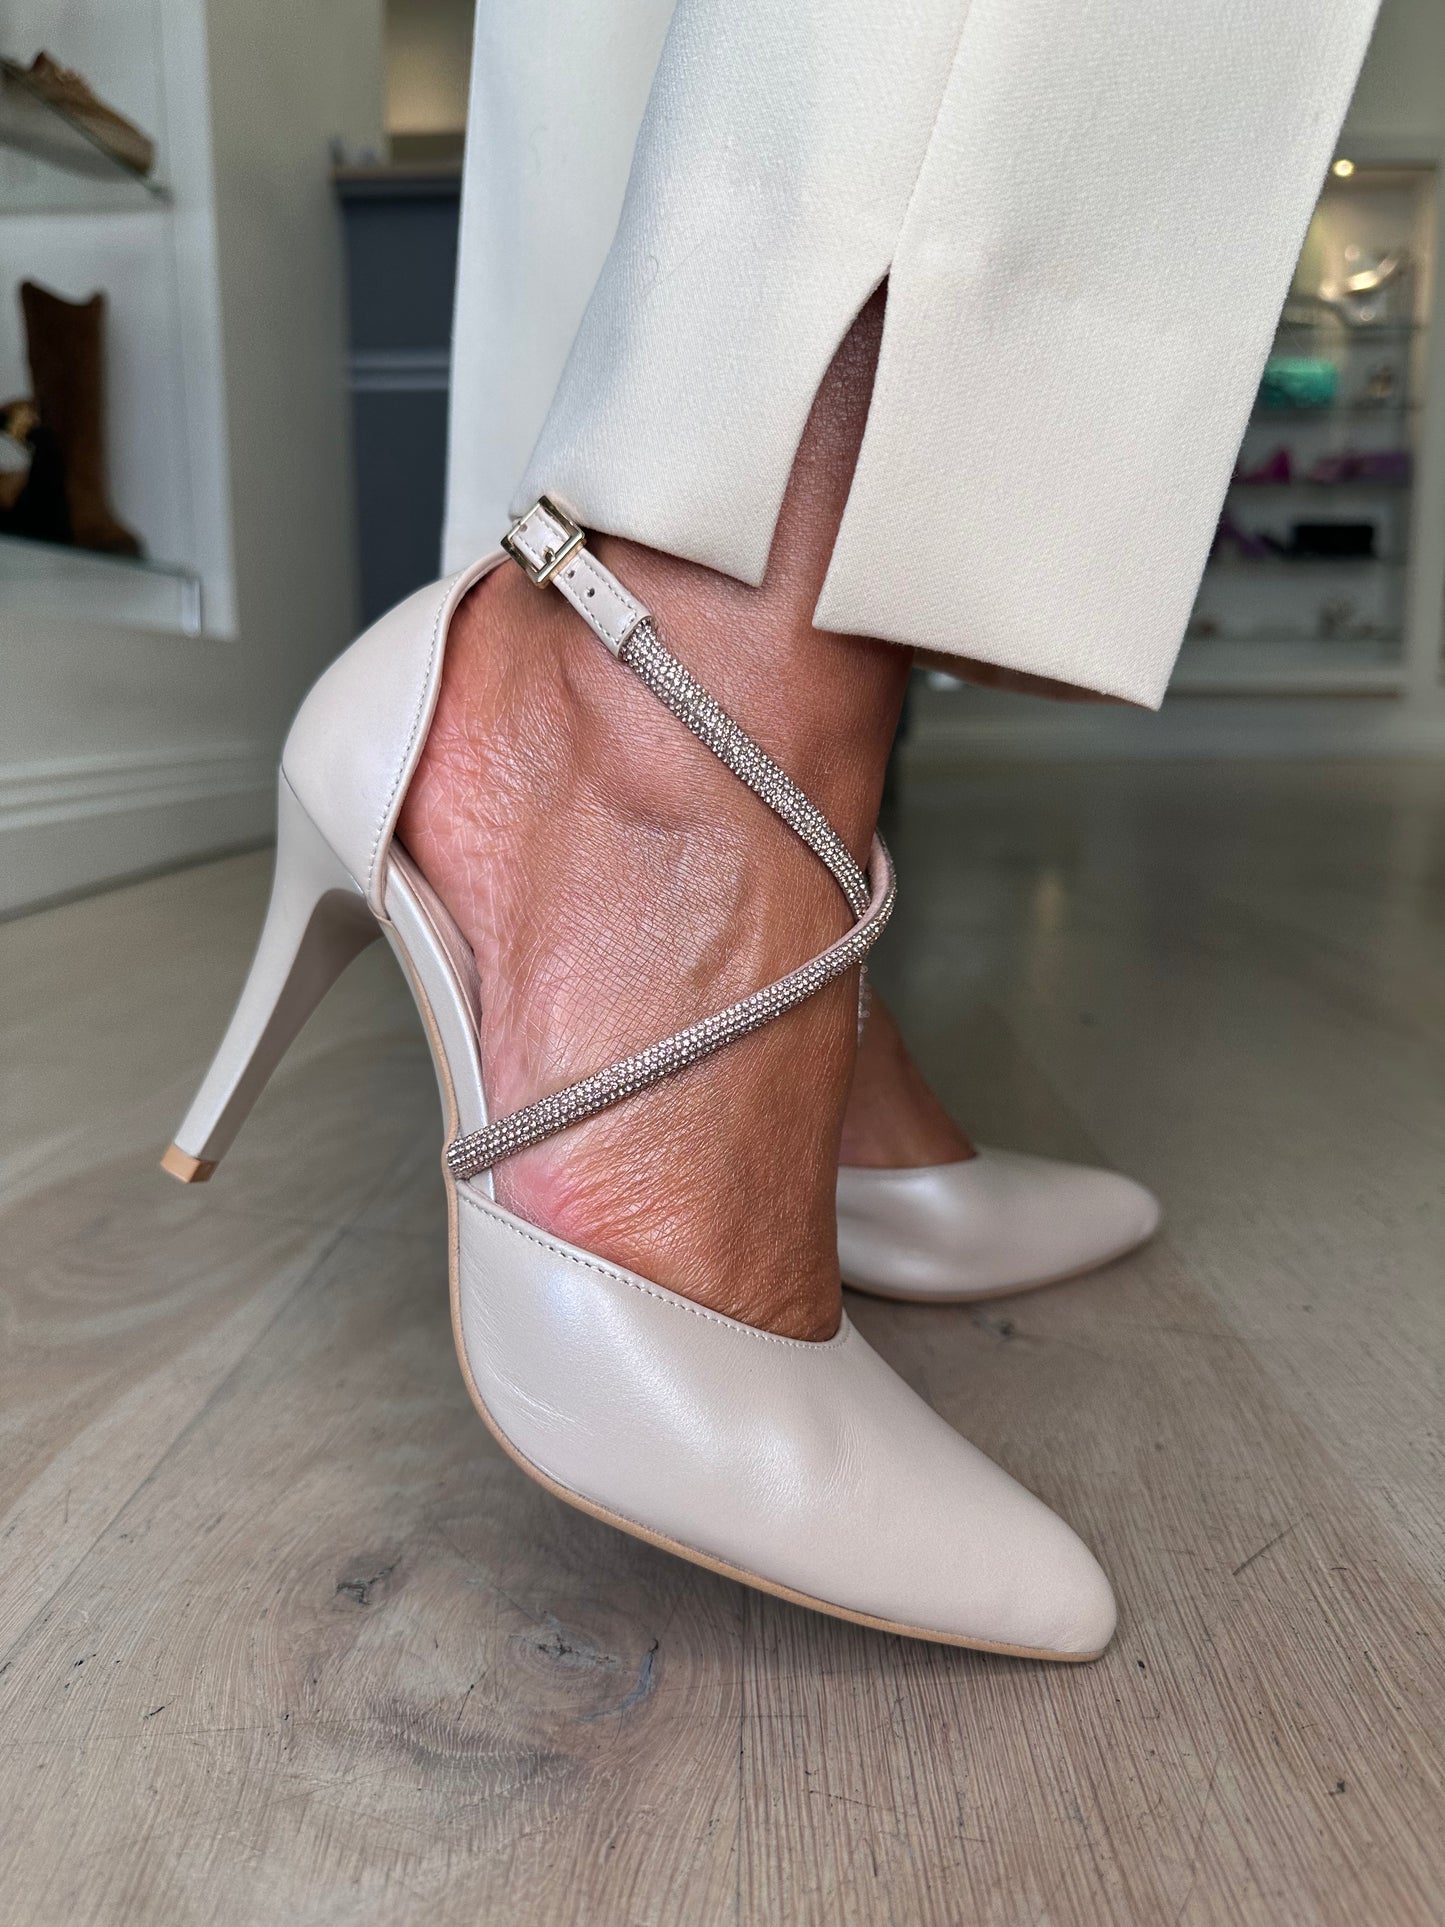 Emis - Pearlised Beige Strappy Diamante Rose Gold Criss Cross Pointy Toe Heel